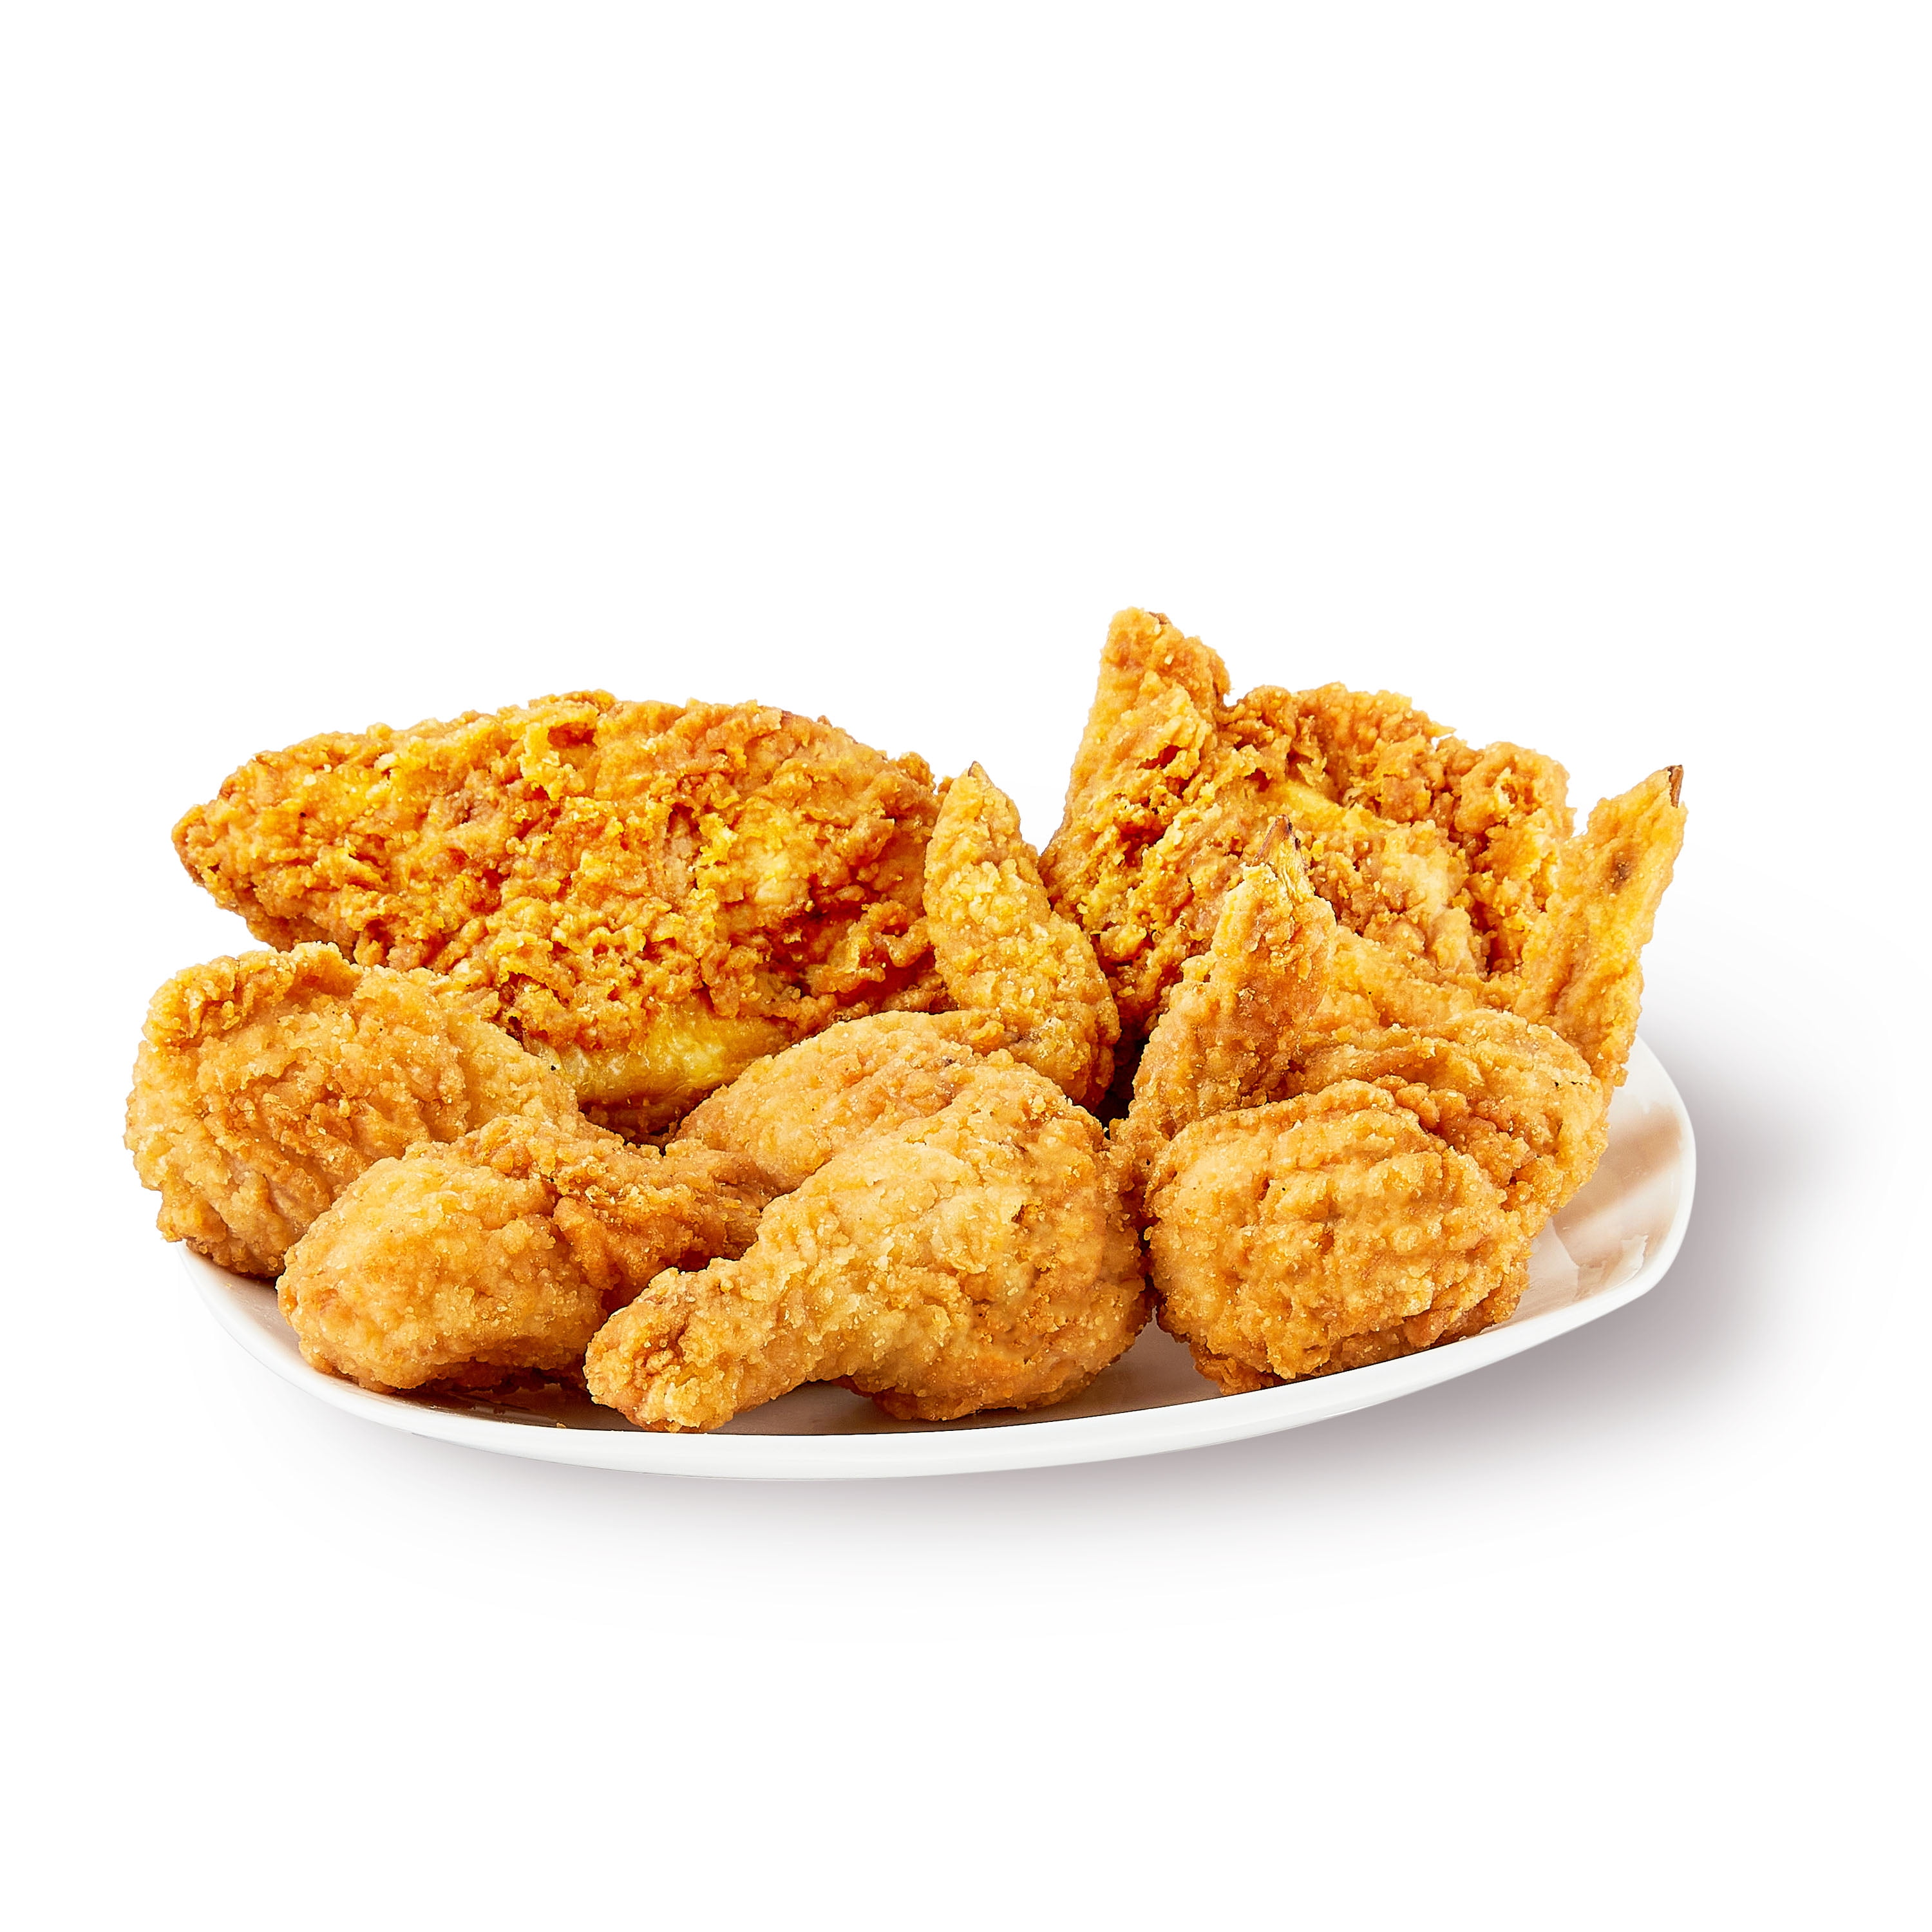 Freshness Guaranteed Fresh, Hot, Ready-to-Eat Fried Chicken, 8 Pieces 